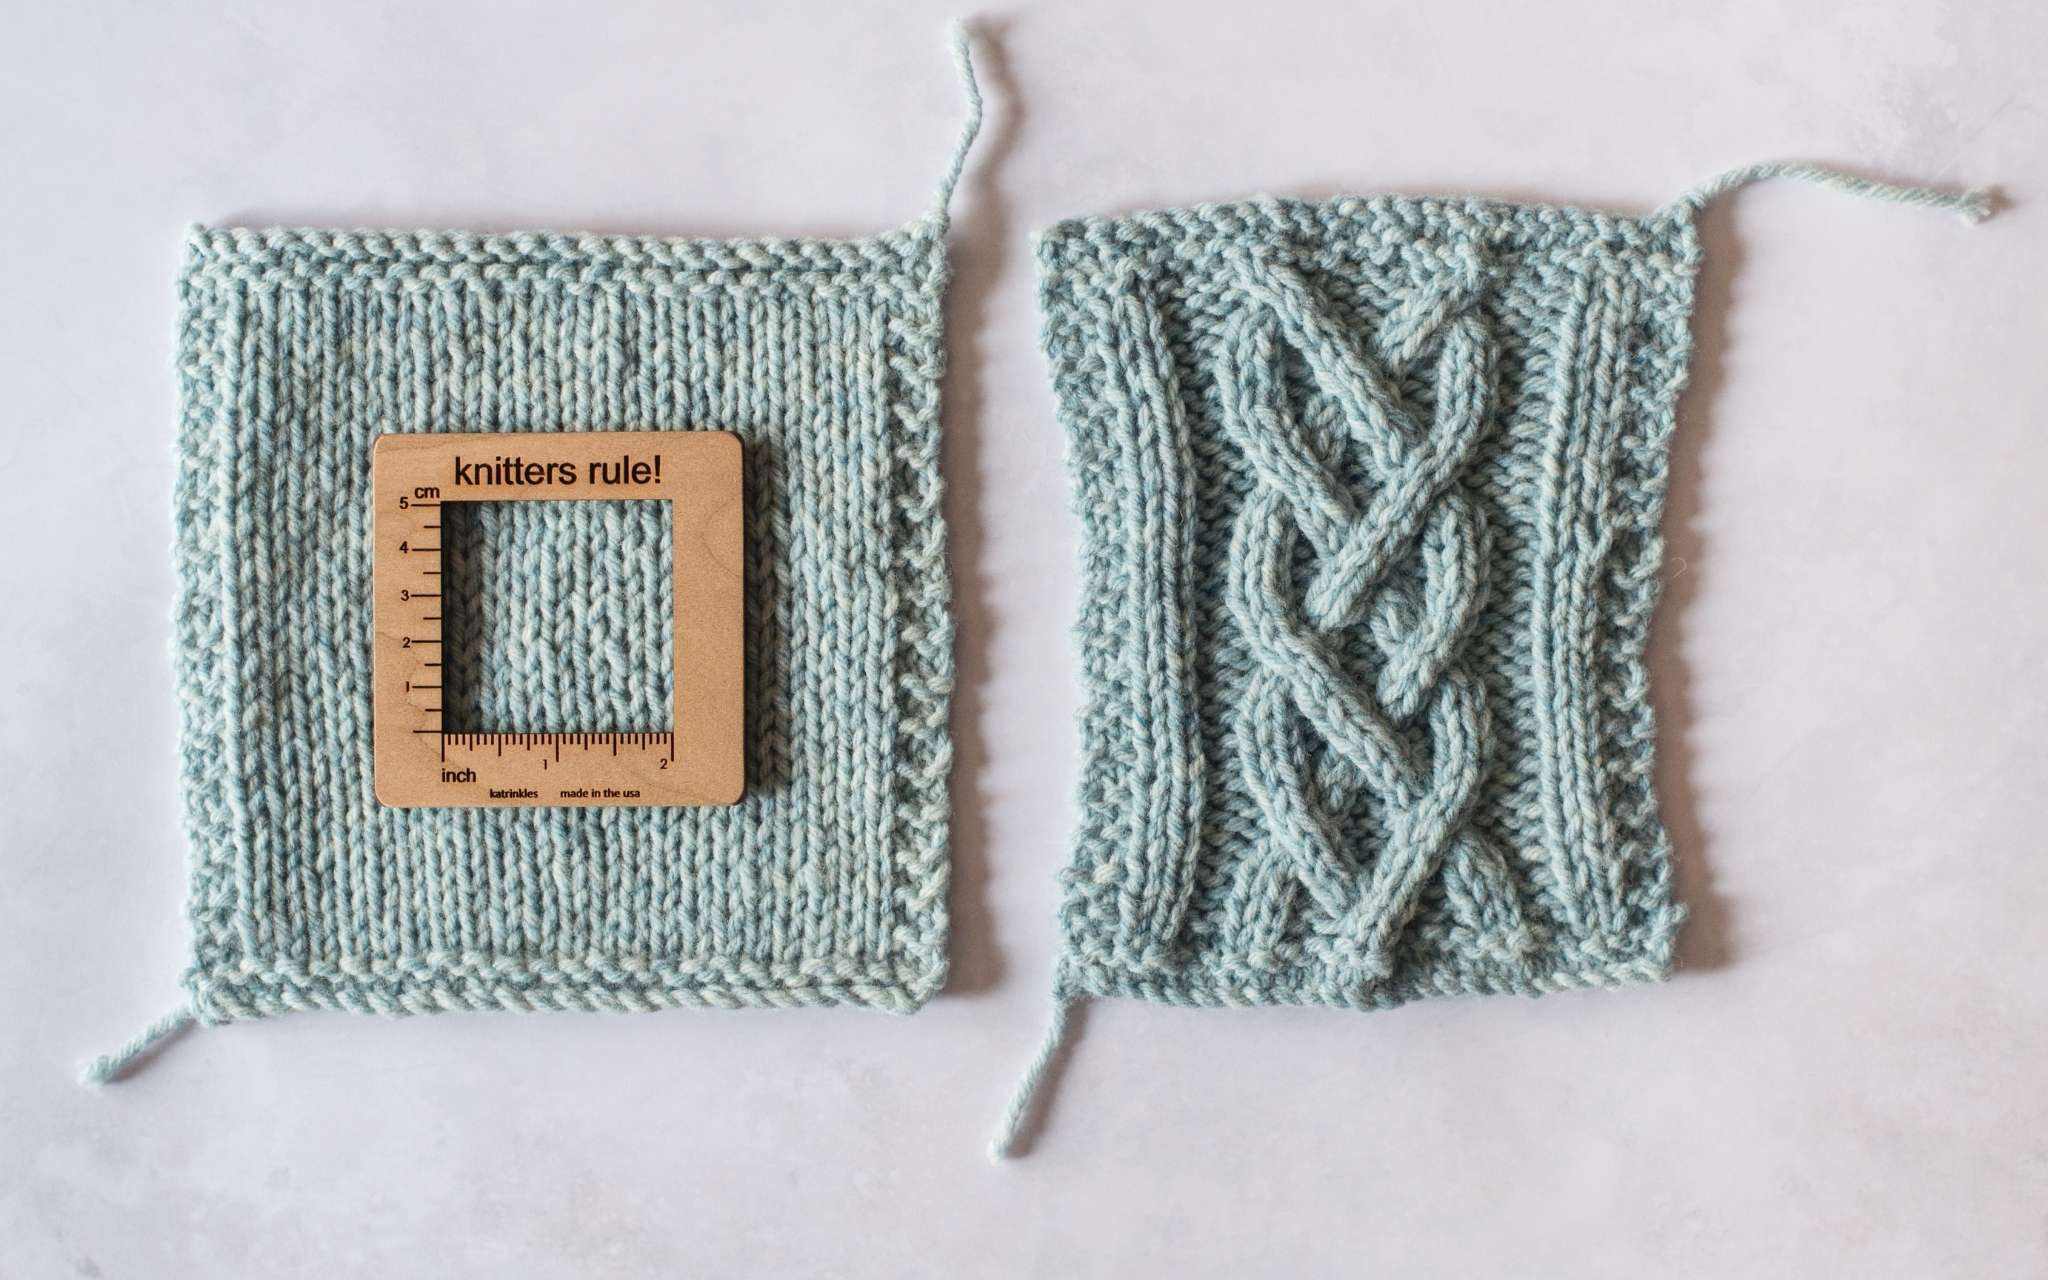 Two swatches lie next to each other. The left swatch has been knitted in stocking stitch and has a wooden measuring tool on top. The swatch in the right is in the same yarn but has been knitted in a more dense cabled pattern.